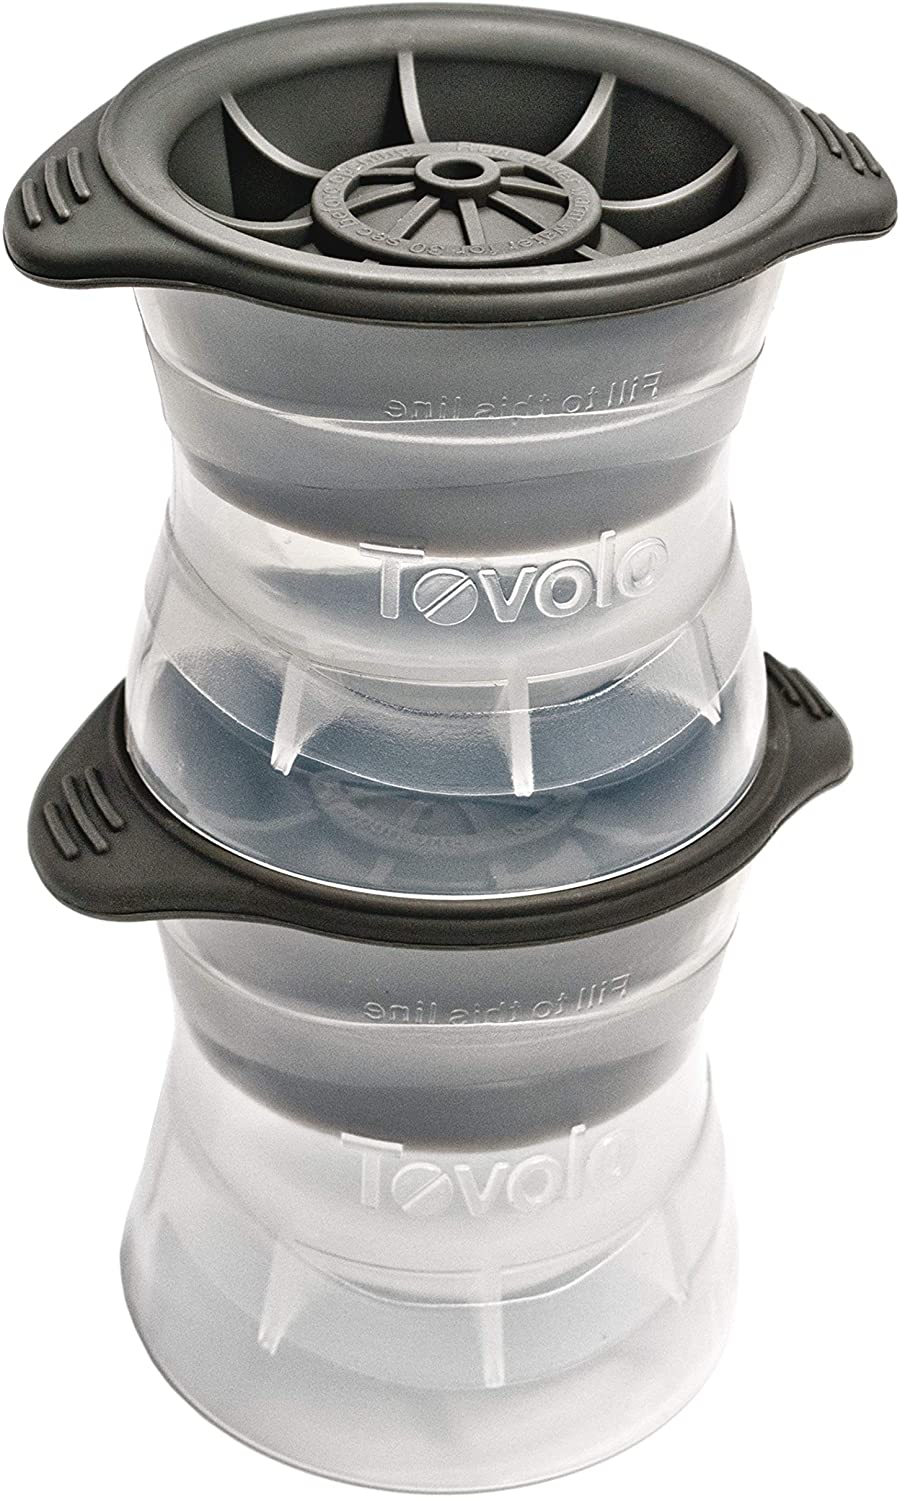 Tovolo Sphere Ice Molds Set/2